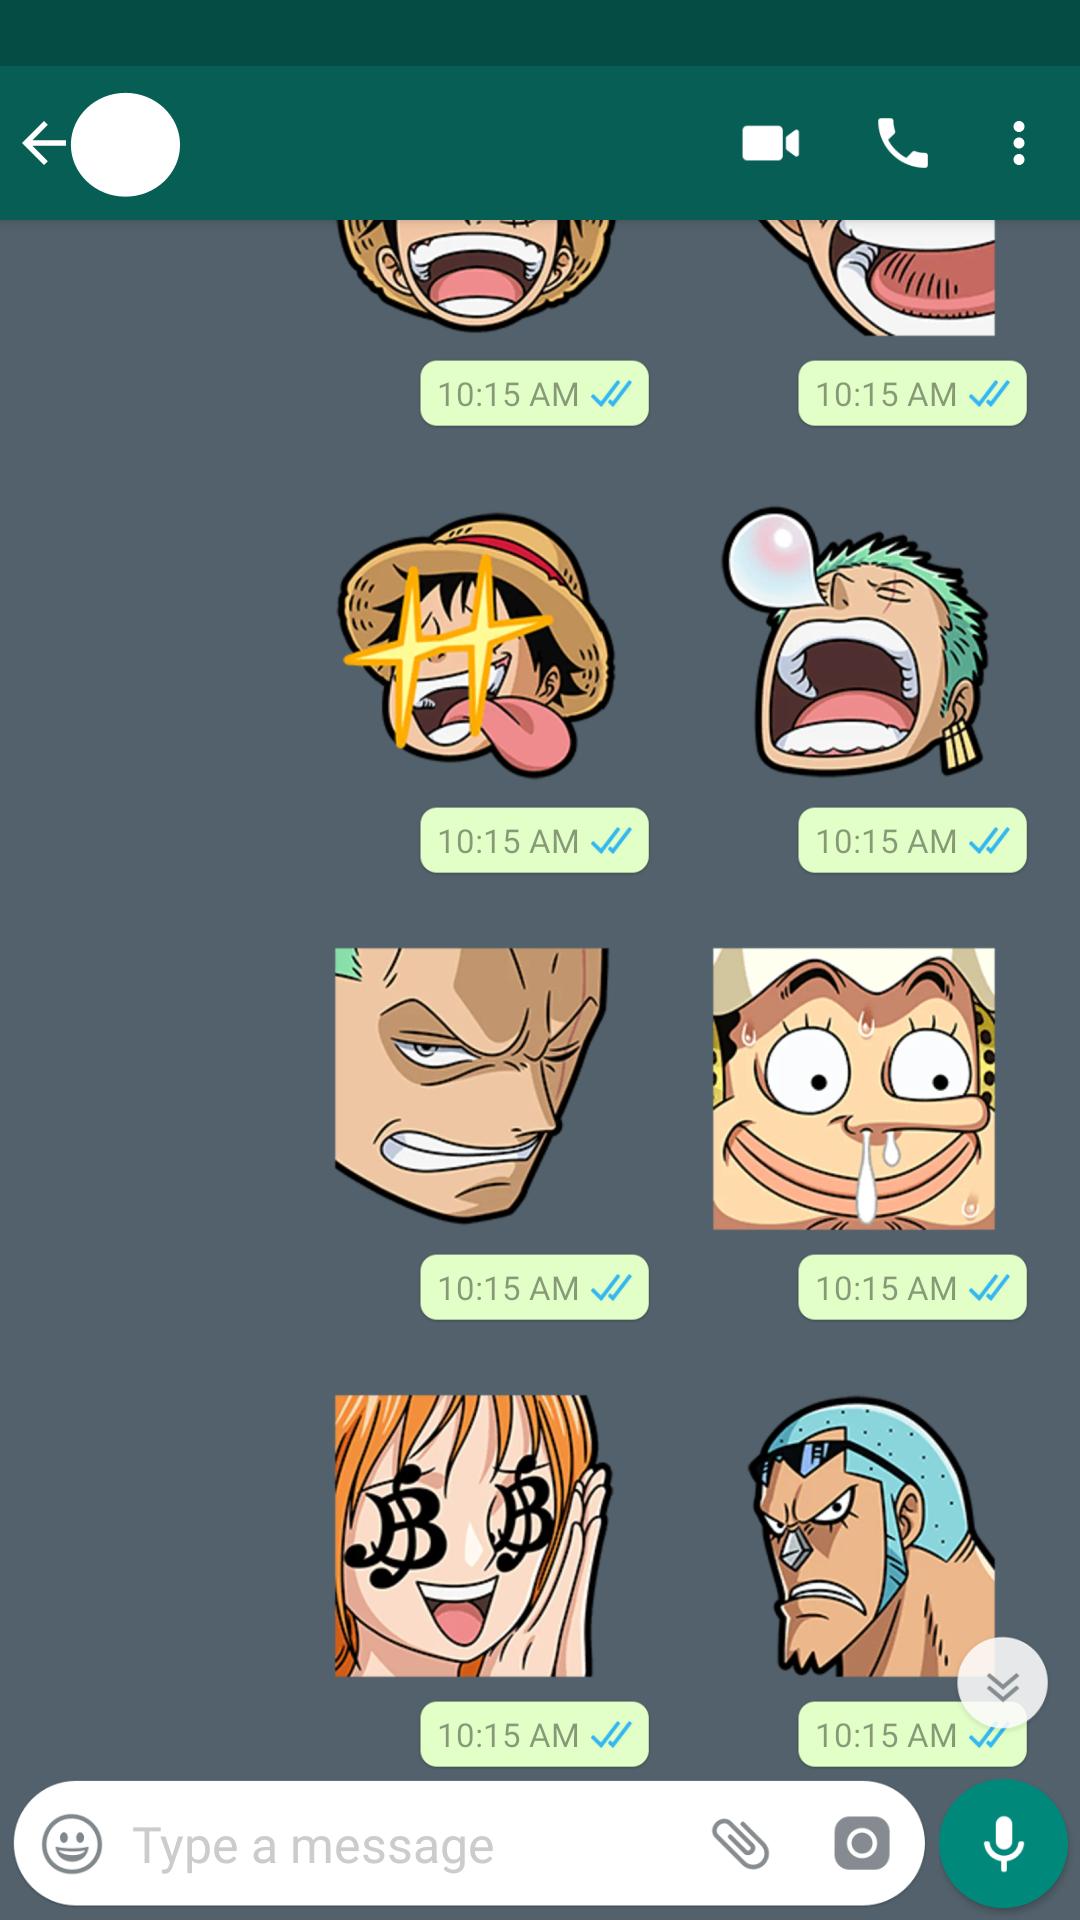 One Piece Sticker For Android Apk Download